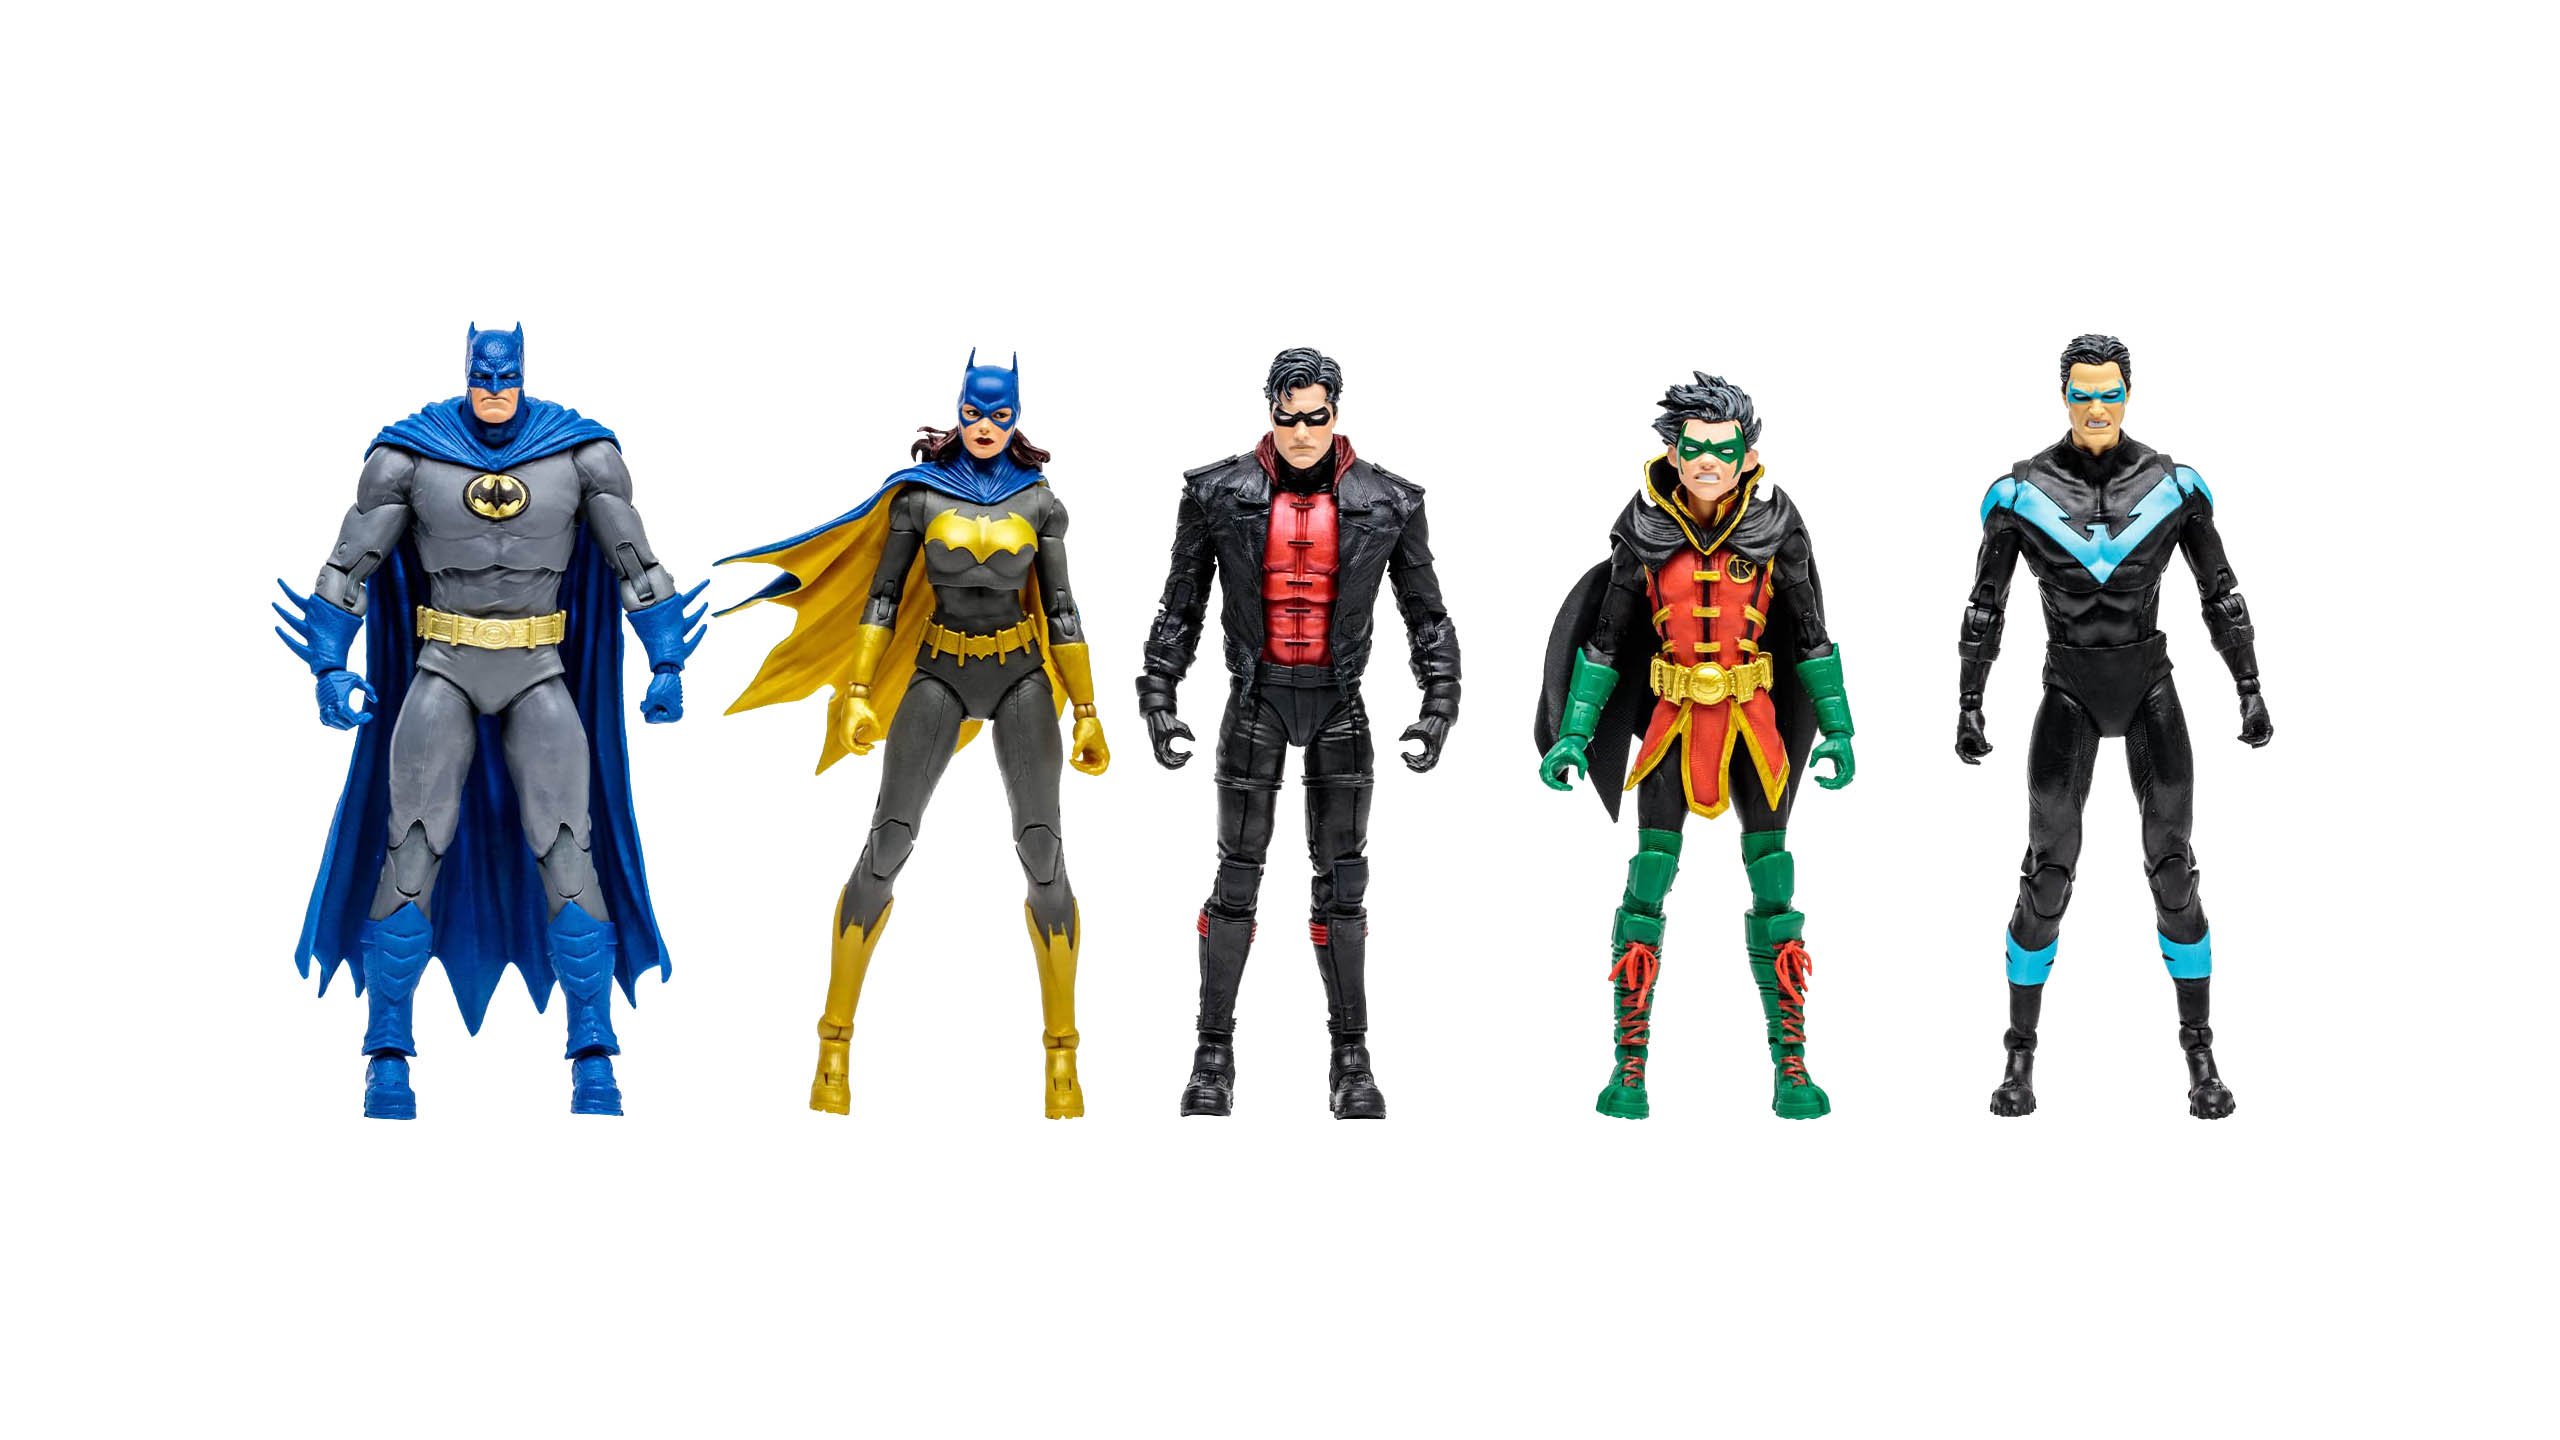 Bat-Family 5-Pack Sold Exclusively on Amazon - Dark Knight News